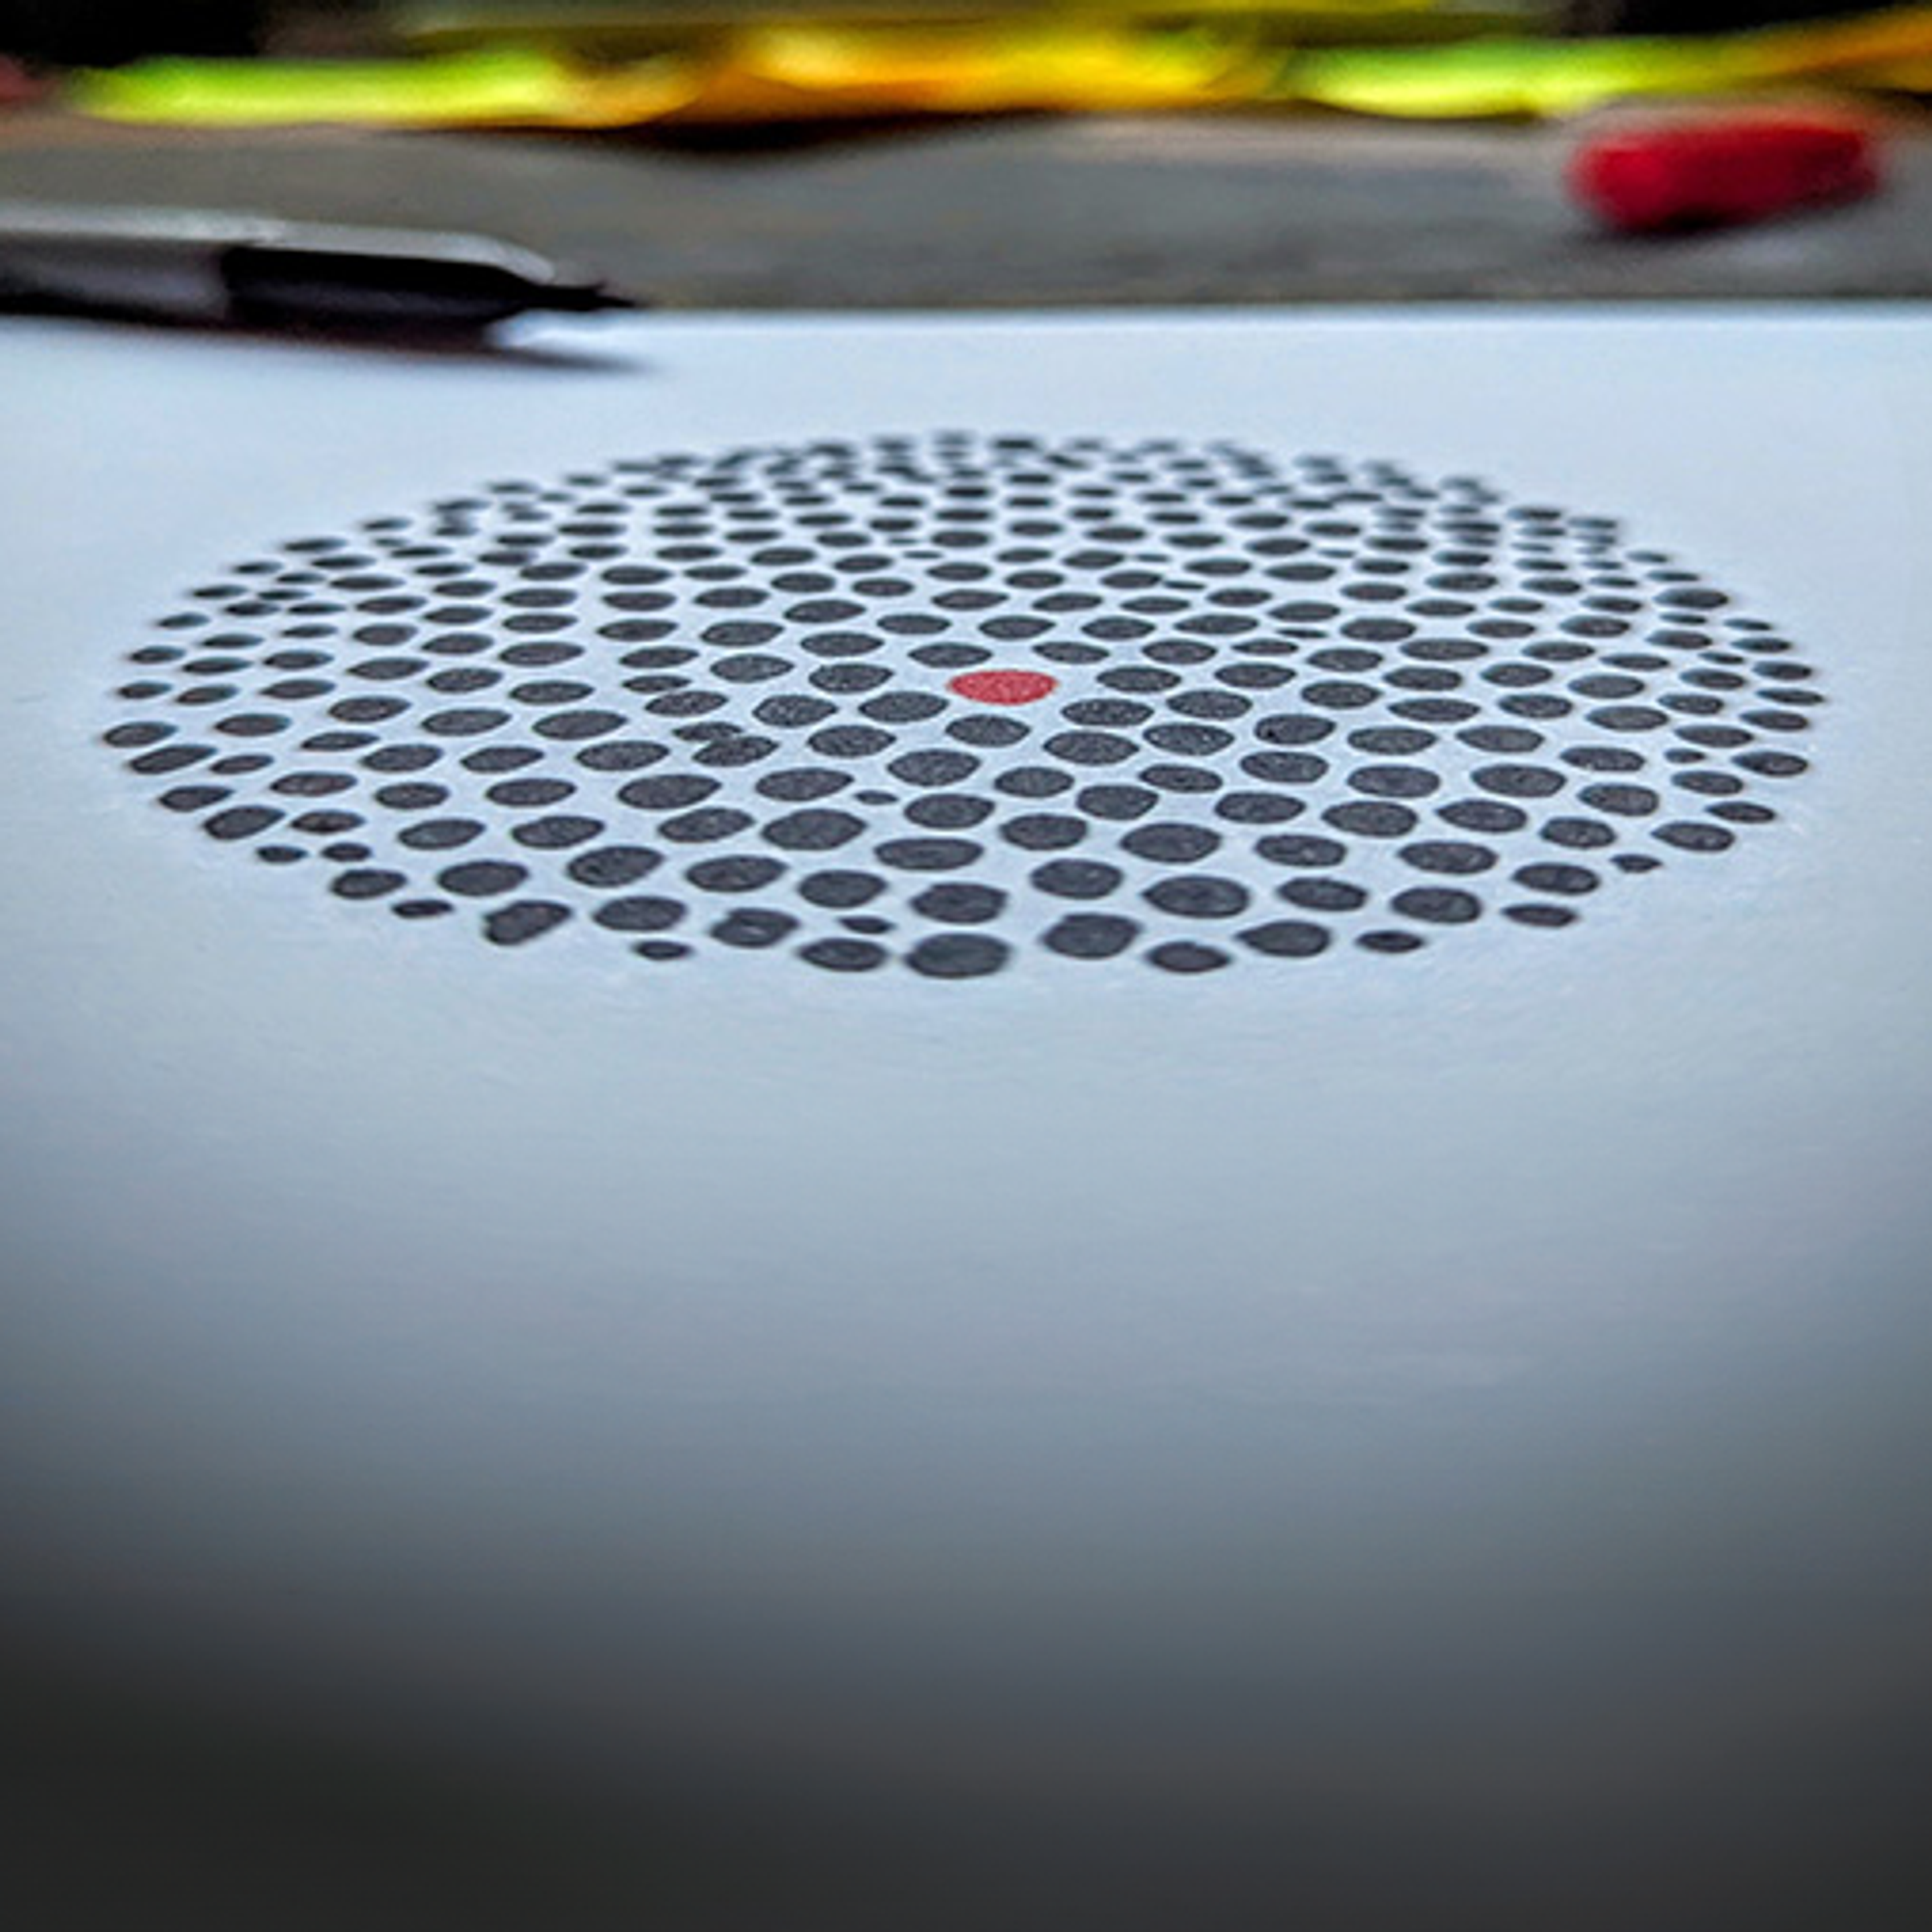 An abstract drawn image of dots on paper in a circle 